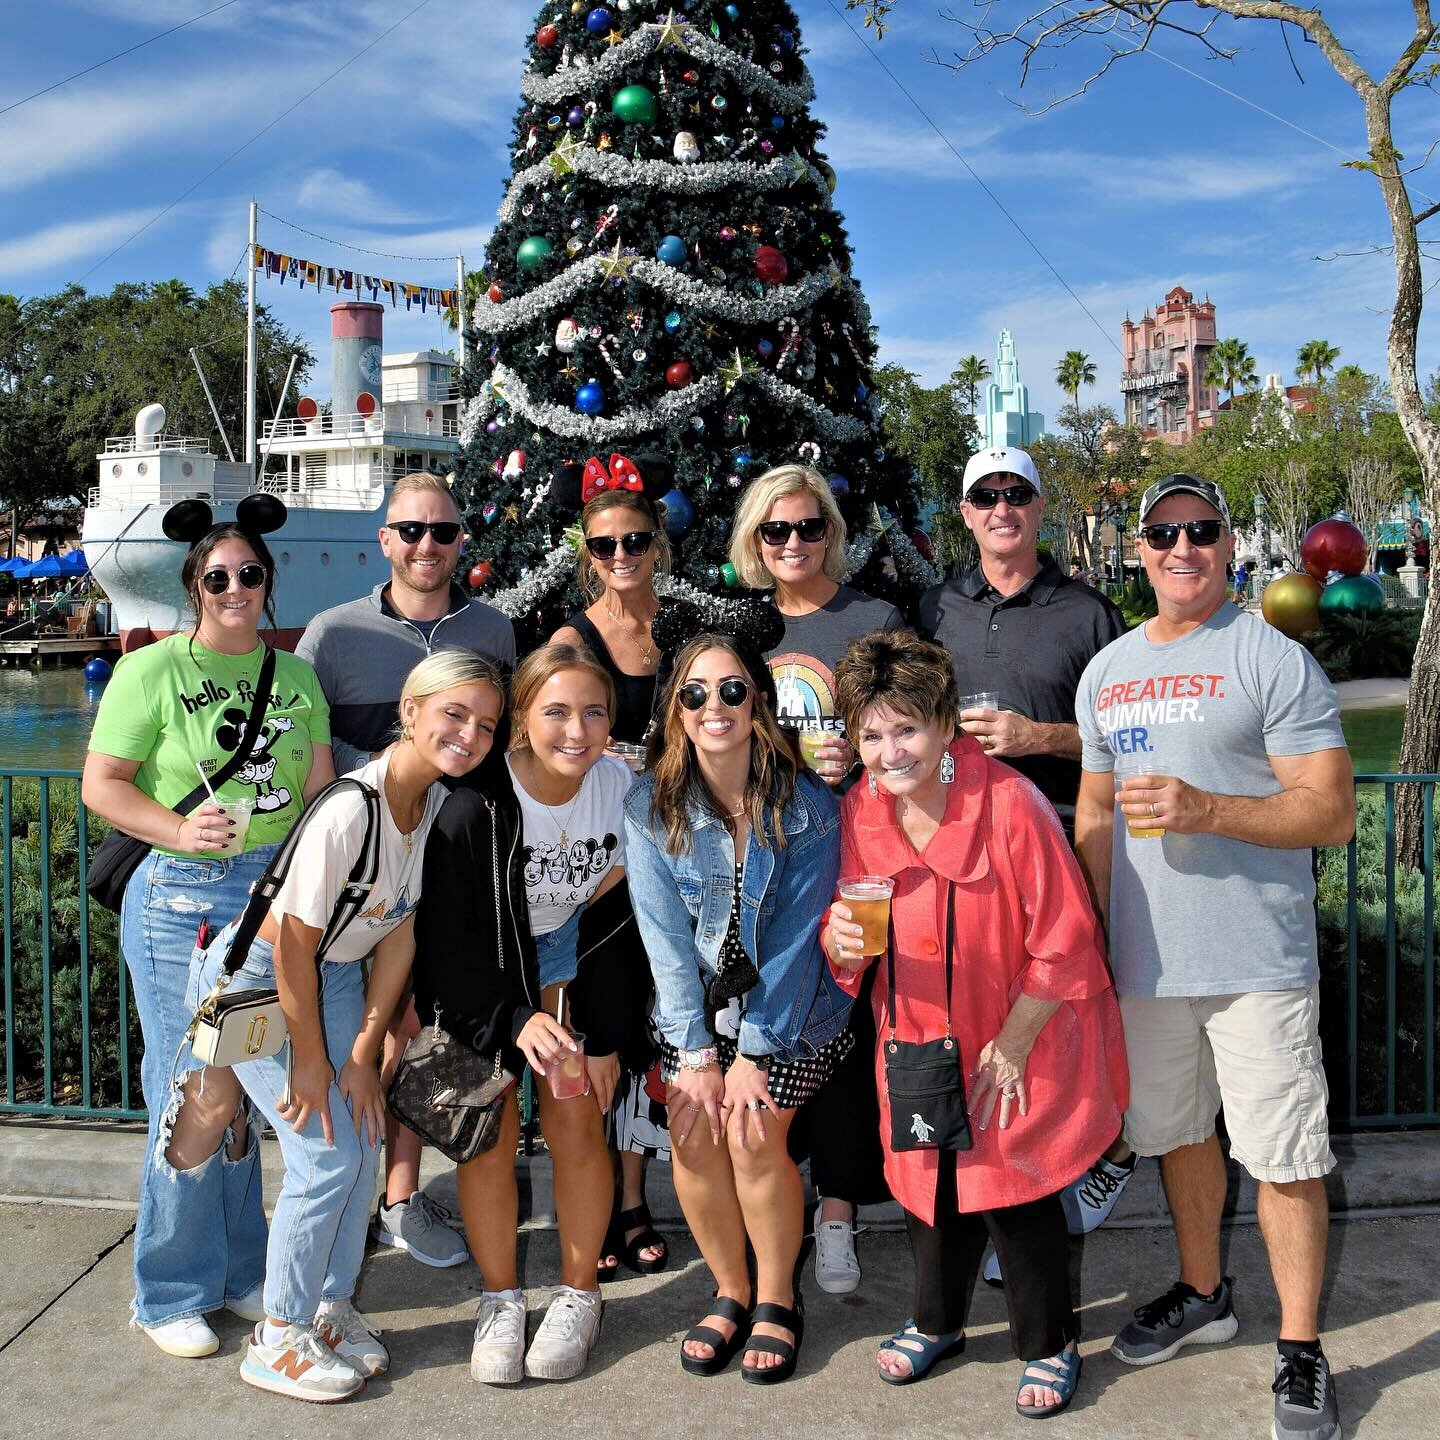 🫶🏼 family

it&rsquo;s only the second time we visited @waltdisneyworld as one big family 🤍 eight years ago we were here together for the first time and my grandma asked if we could go again this year 🫶🏼 missing my gramps but we definitely felt h